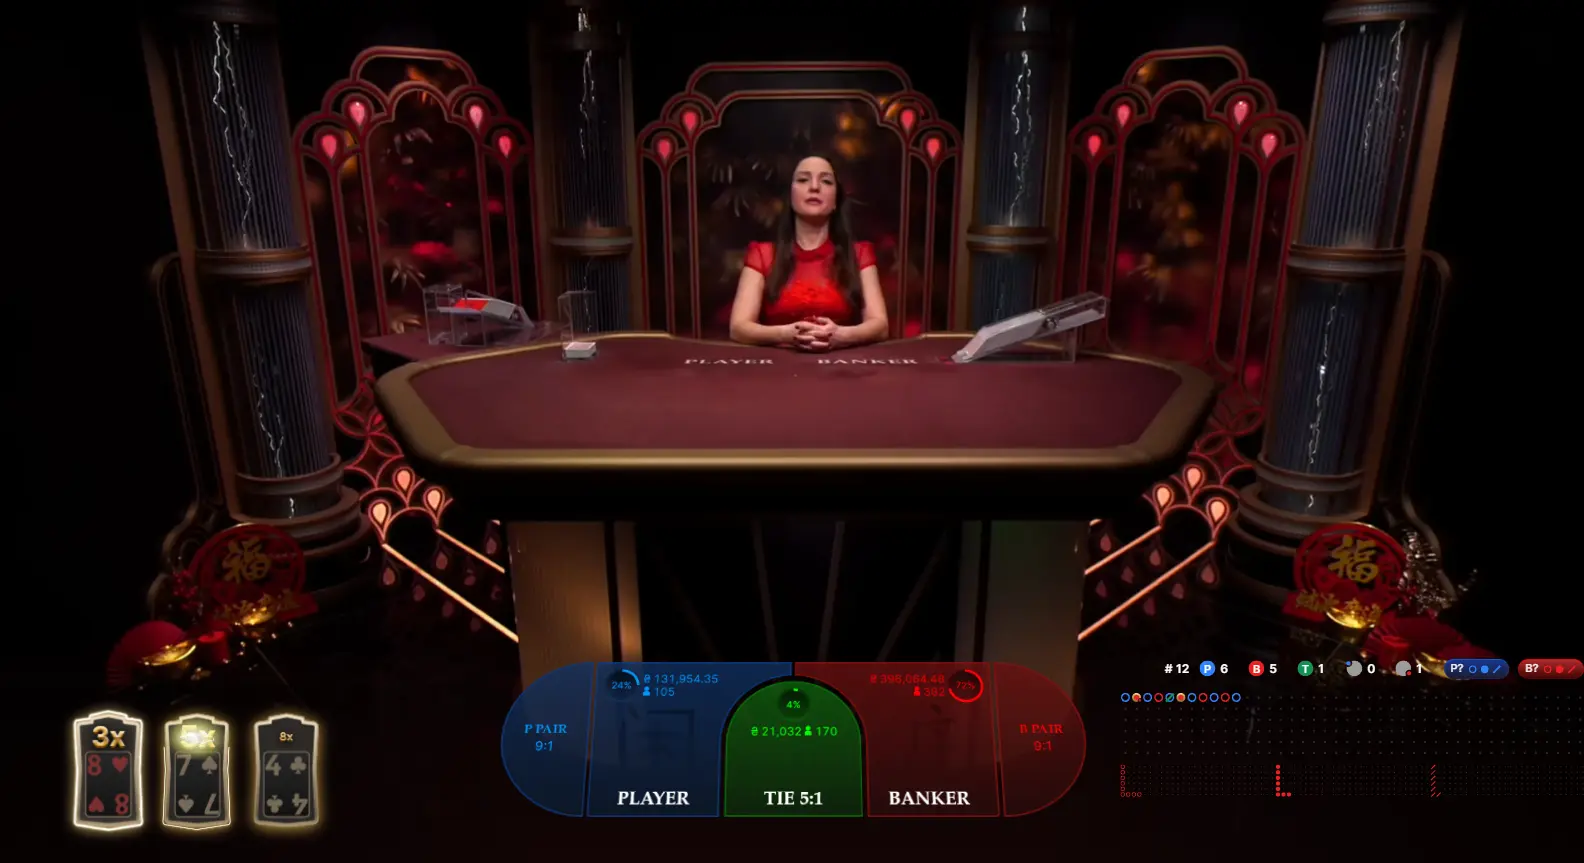 The camera zooms in on the roulette-style sphere the dealer uses when drawing the first card to designate which hand receives it per official baccarat drawing rules.